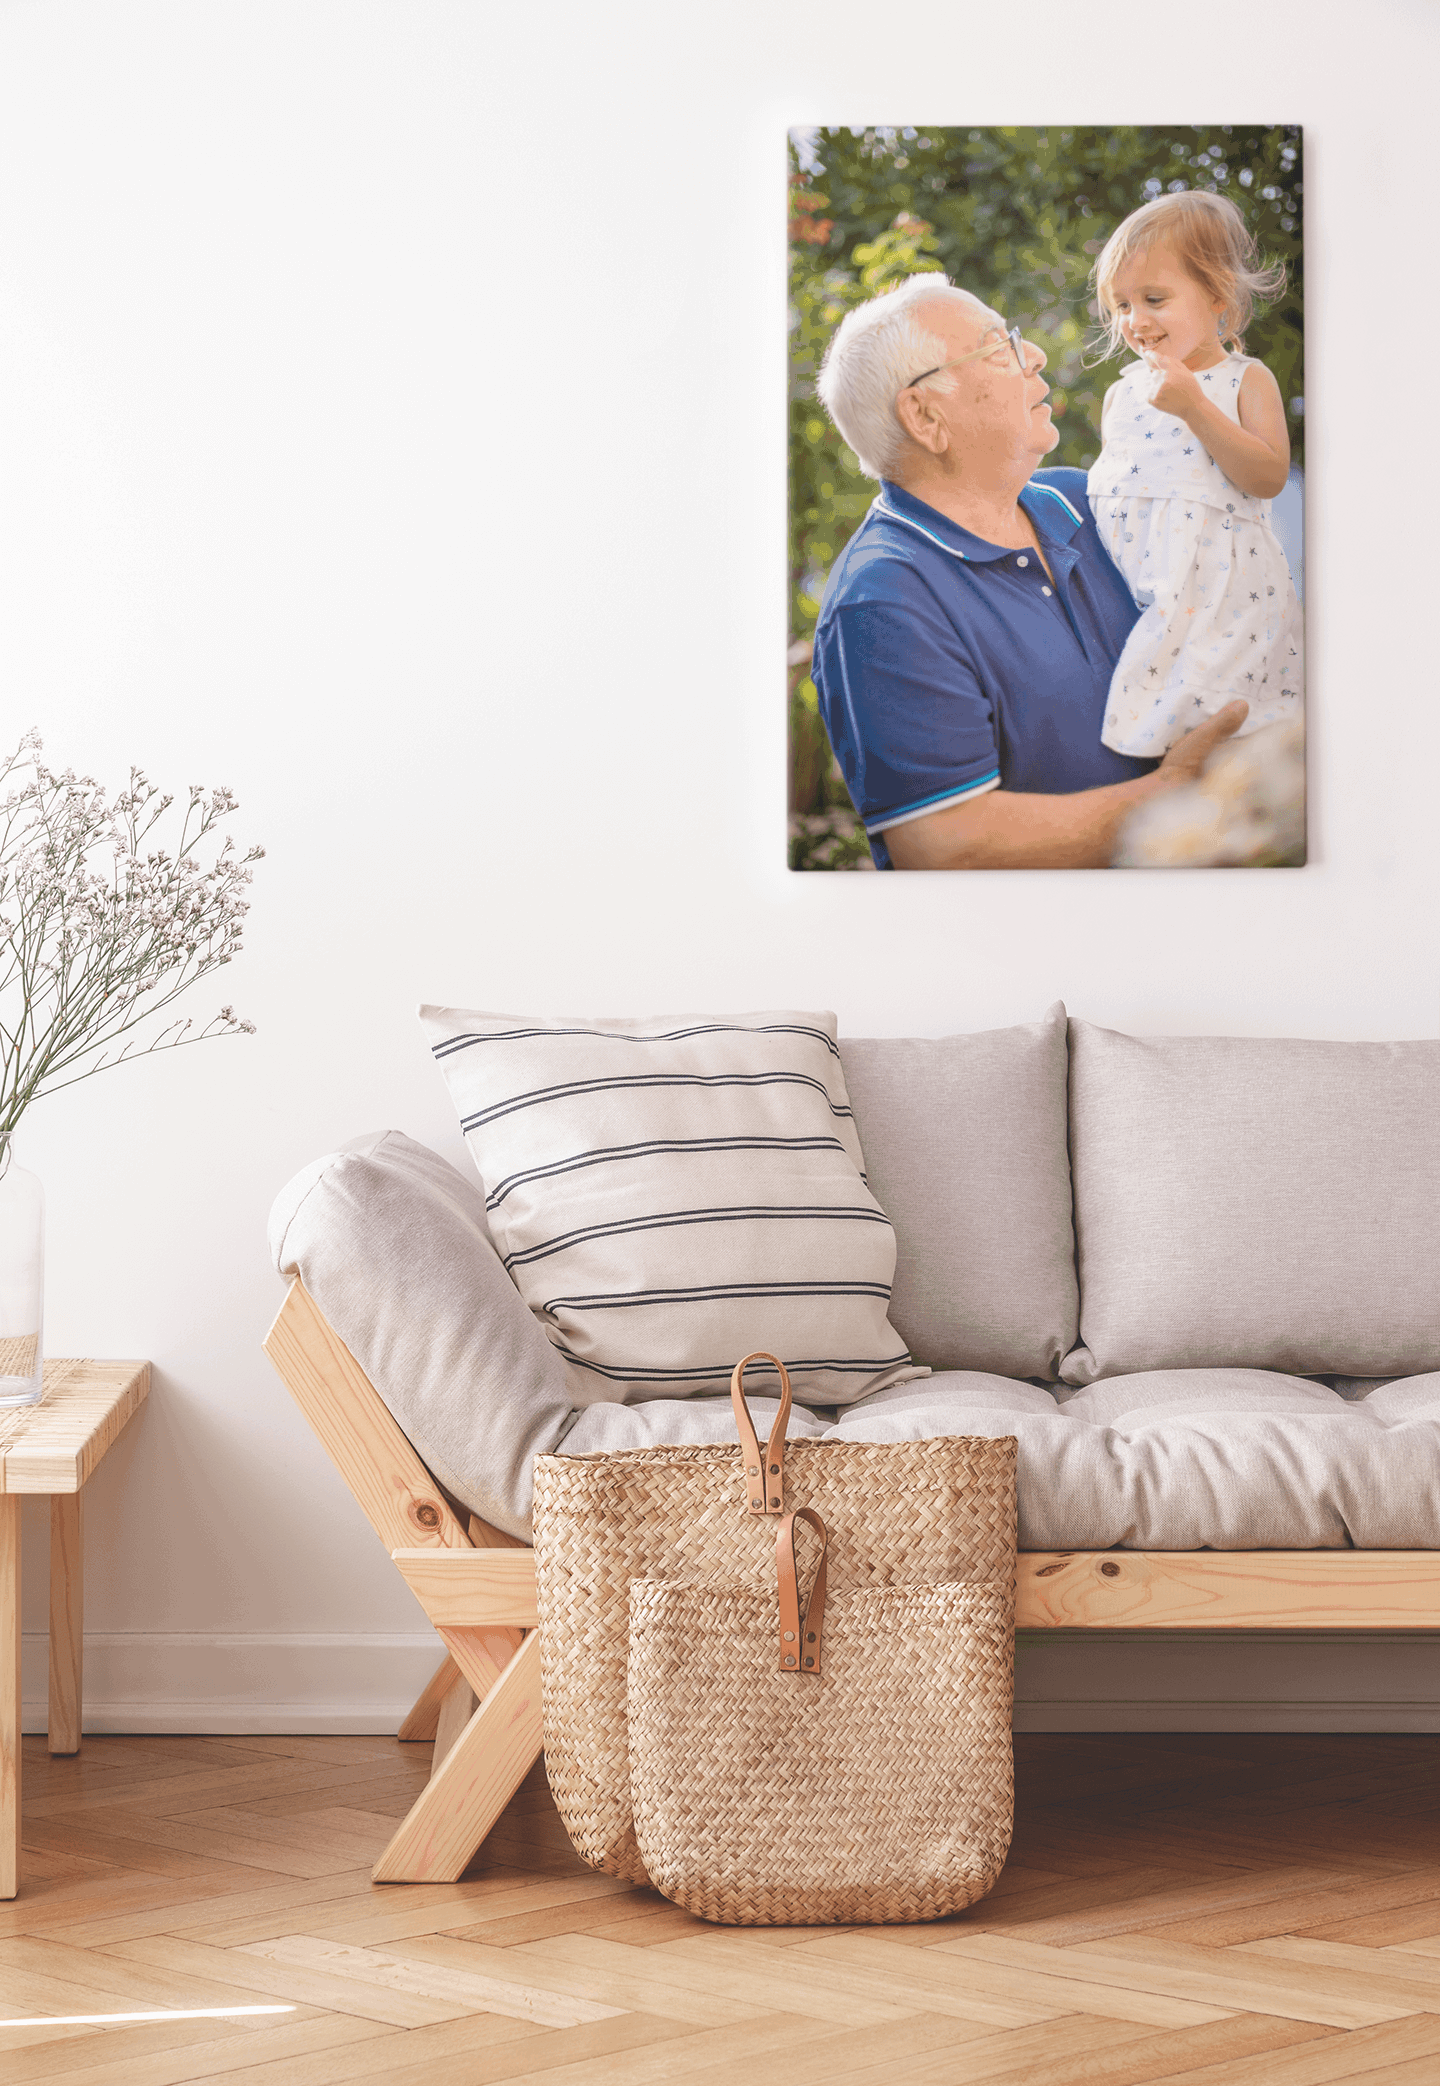 Show Dad Some Love With These Top 10 Father's Day Gift Ideas for Canvas Prints